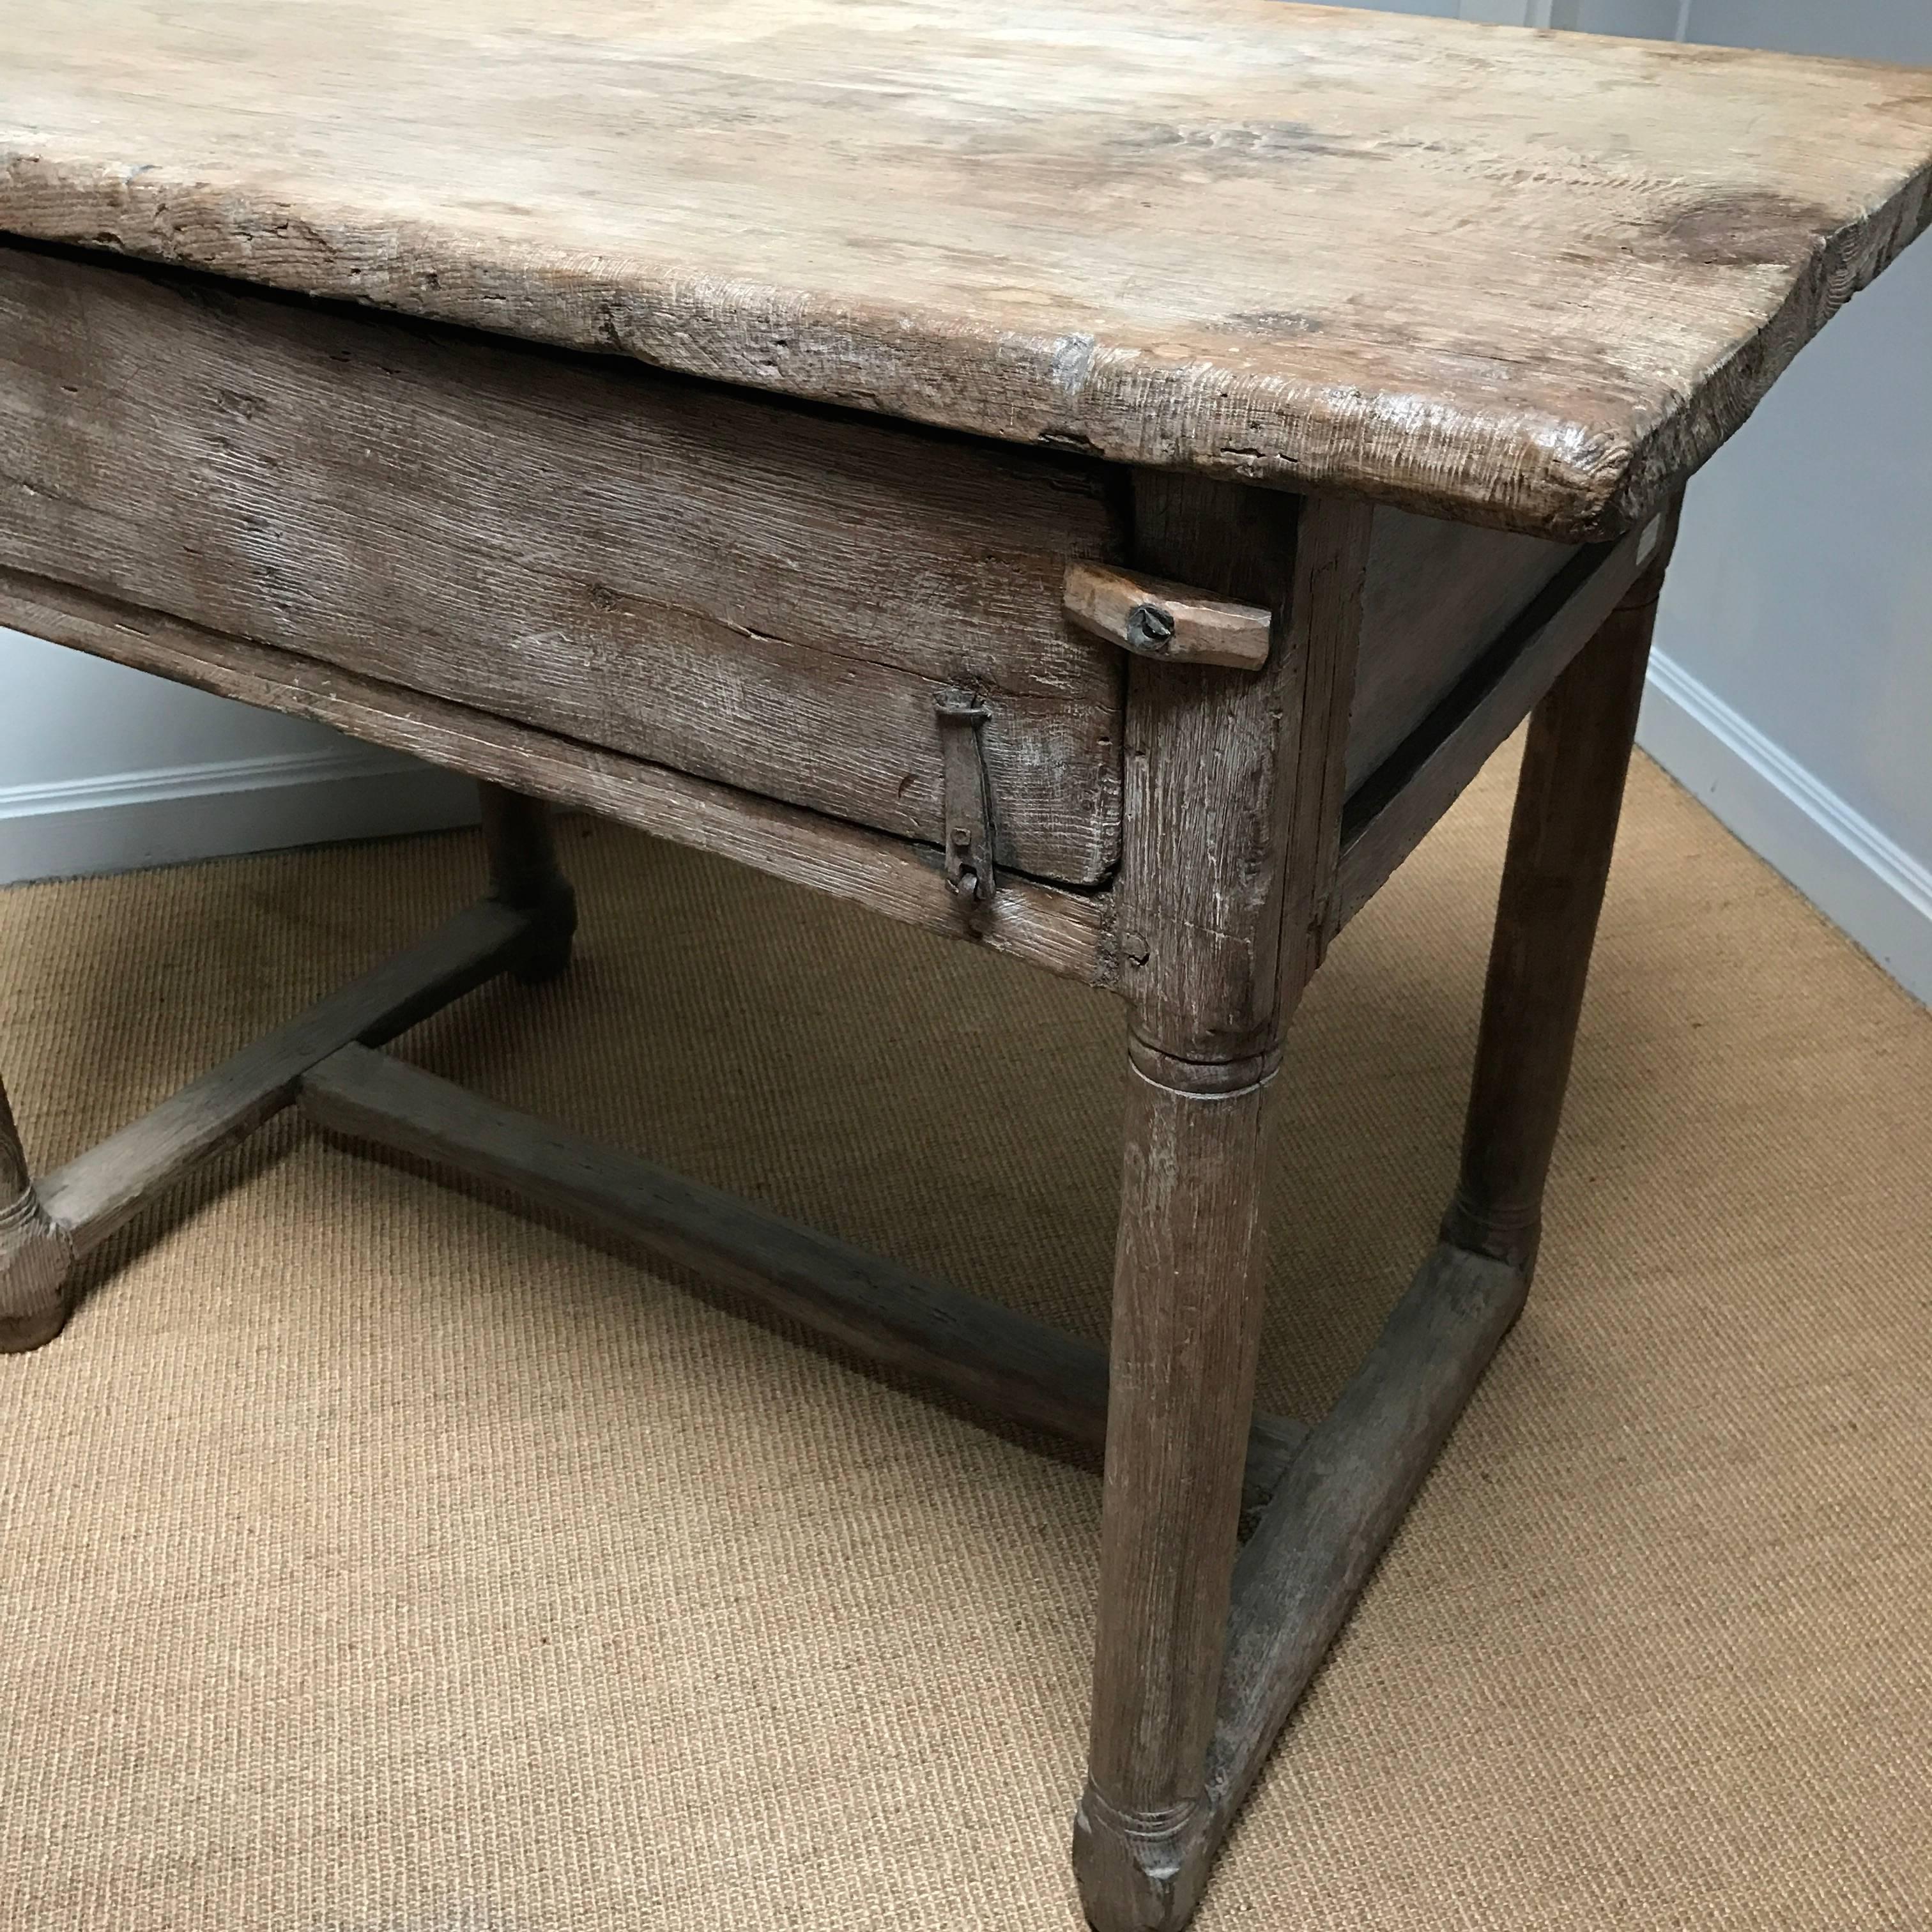 Exceptional French 18th century bleached farm table in Chestnut wood with one drawer and Masonic marks as a protection against bad spirits....
from the Southern part of France.